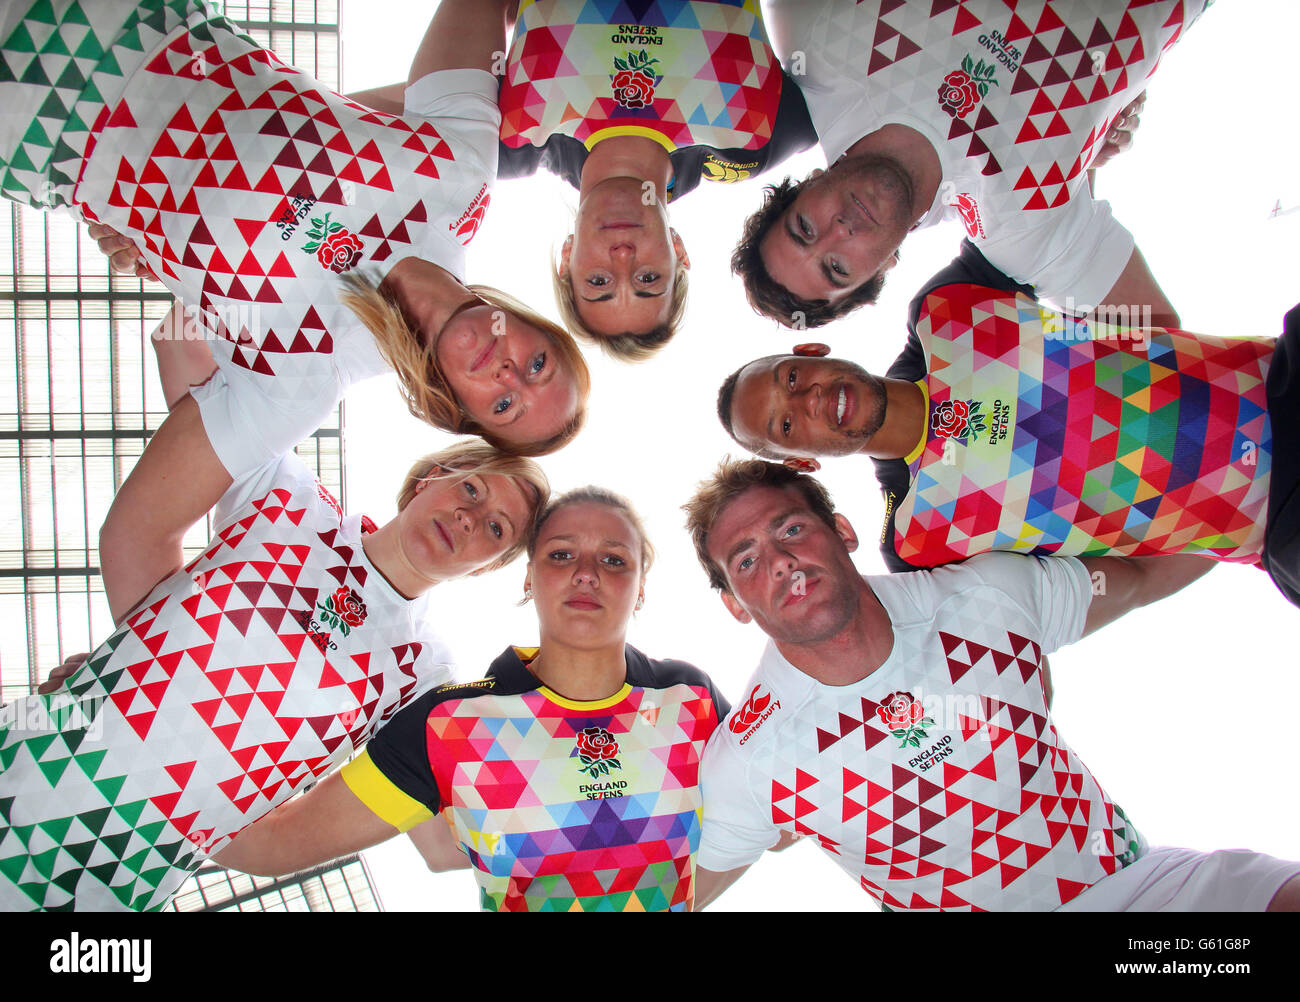 s England Sevens rugby teams Michaela Staniford, Alice Richardson, Matt Turne, Dan Norton, Rob Vickerman, Kay Wilson and Danielle Waterman launch the new Canterbury Rugby Sevens home and alternate shirts at Twickenham Stadium in south west London. Stock Photo